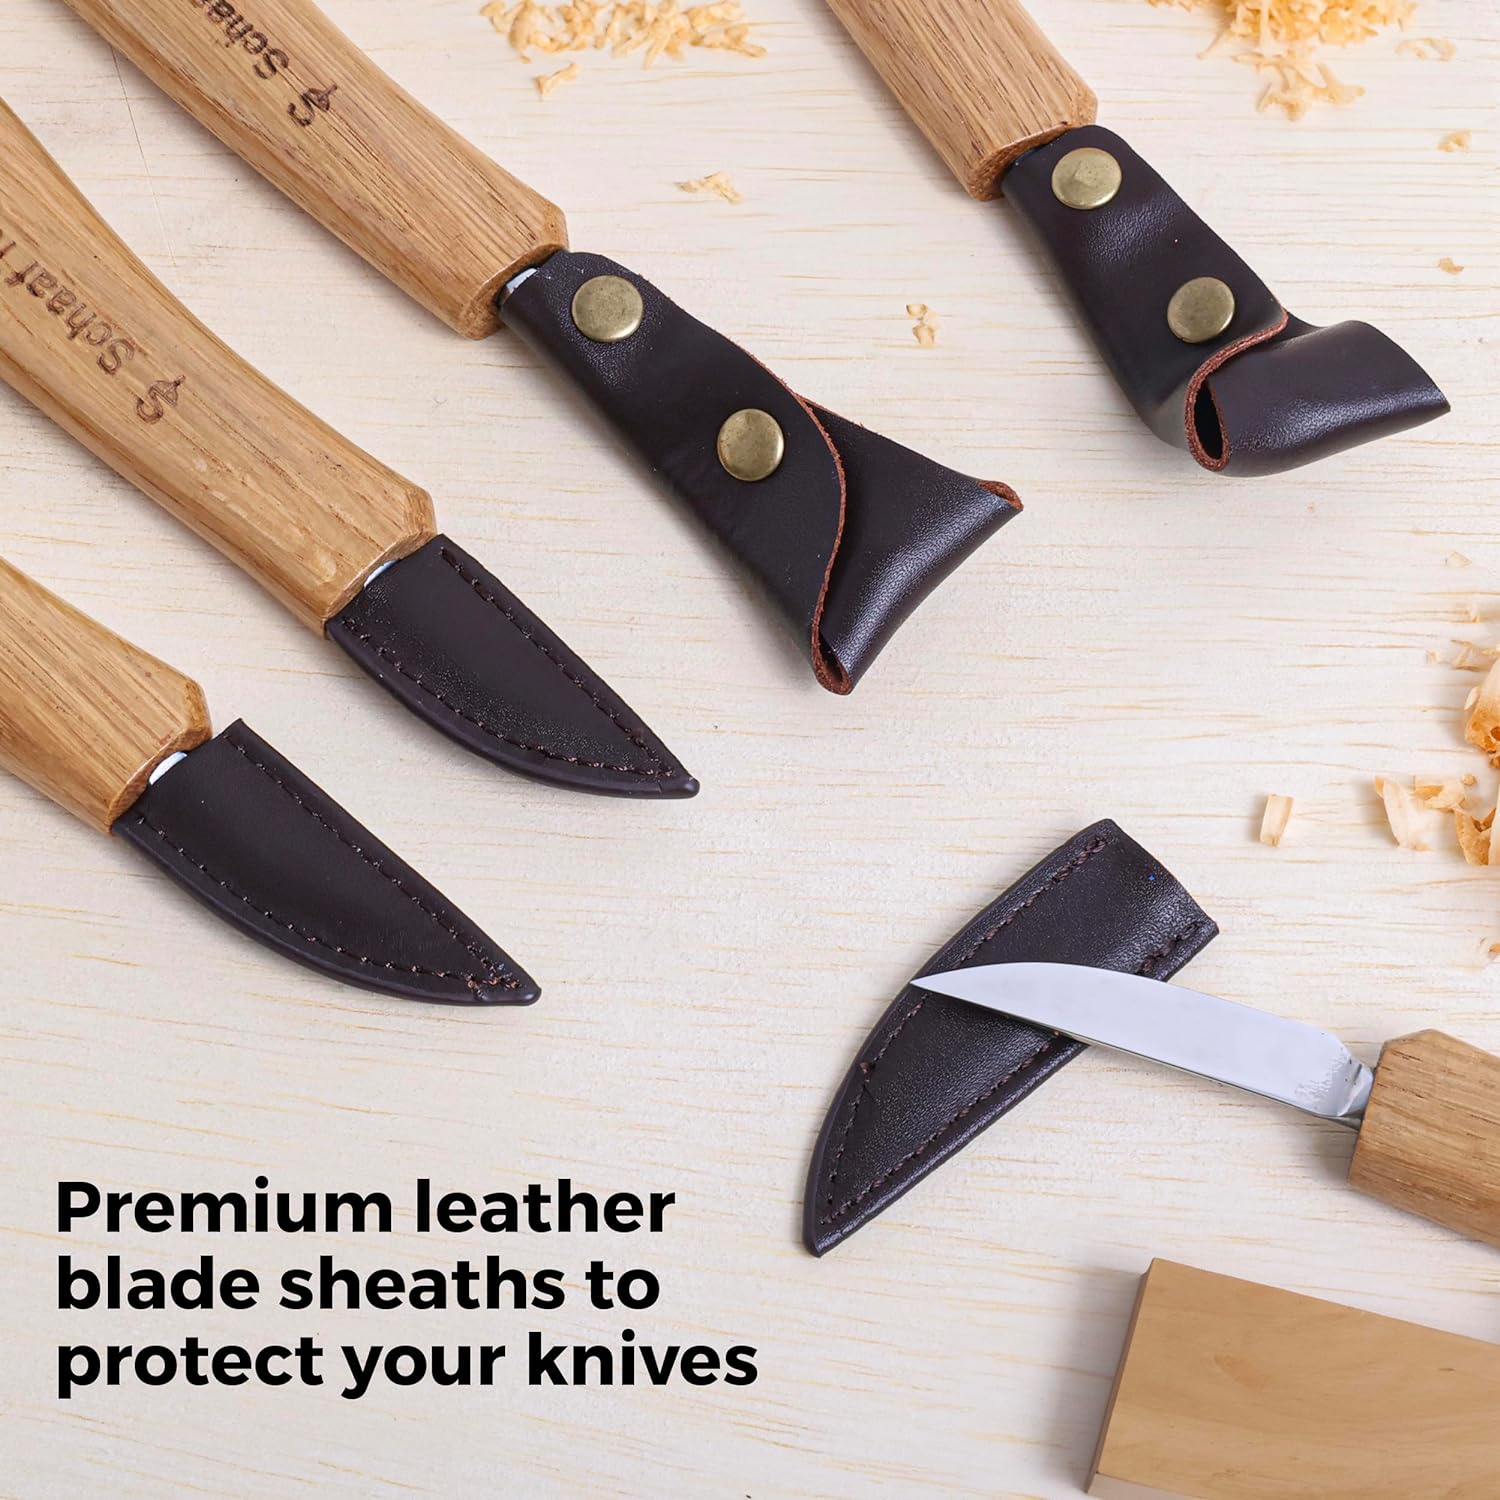 5-Piece Deluxe Carving Knife Set - Perfect for Whittling and Spoon Carving